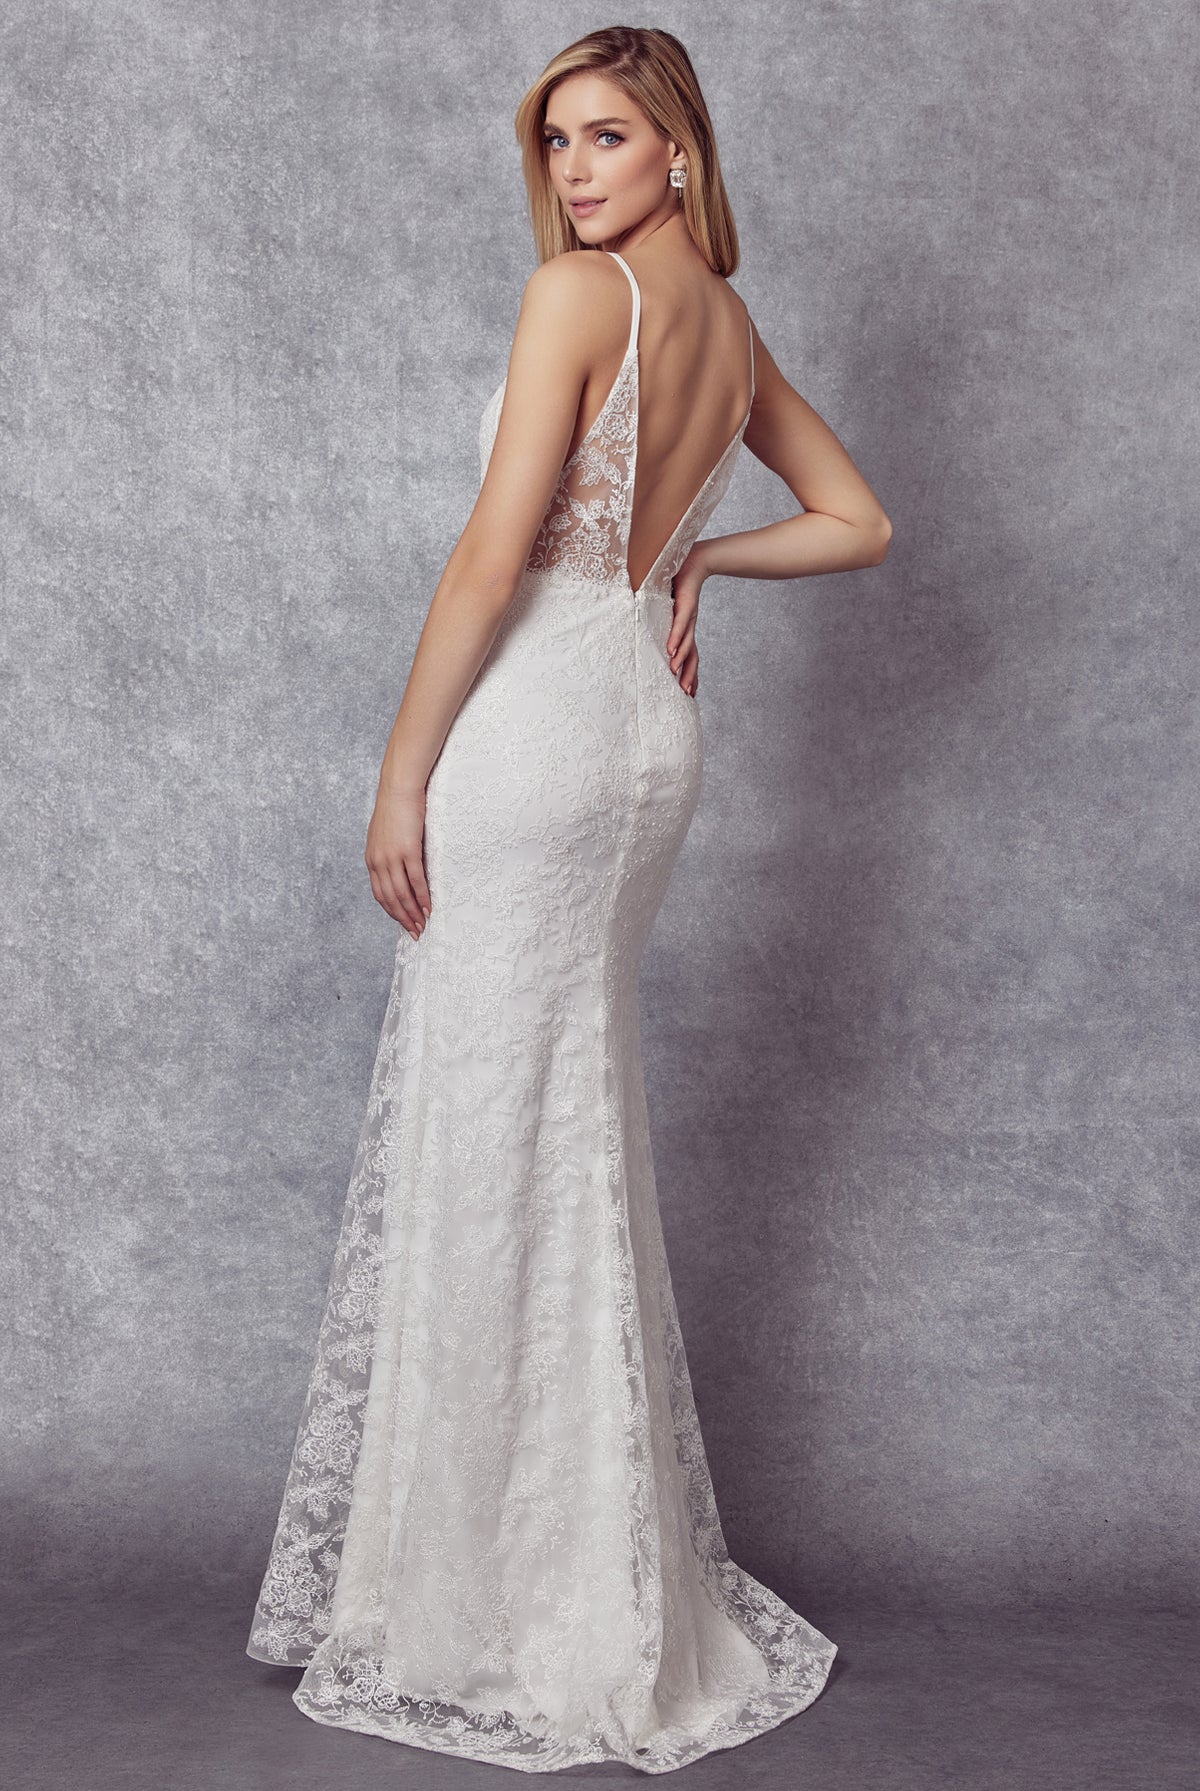 Embroidered Lace V-Neck Evening & Prom Dress with Open Back Illusion-smcdress